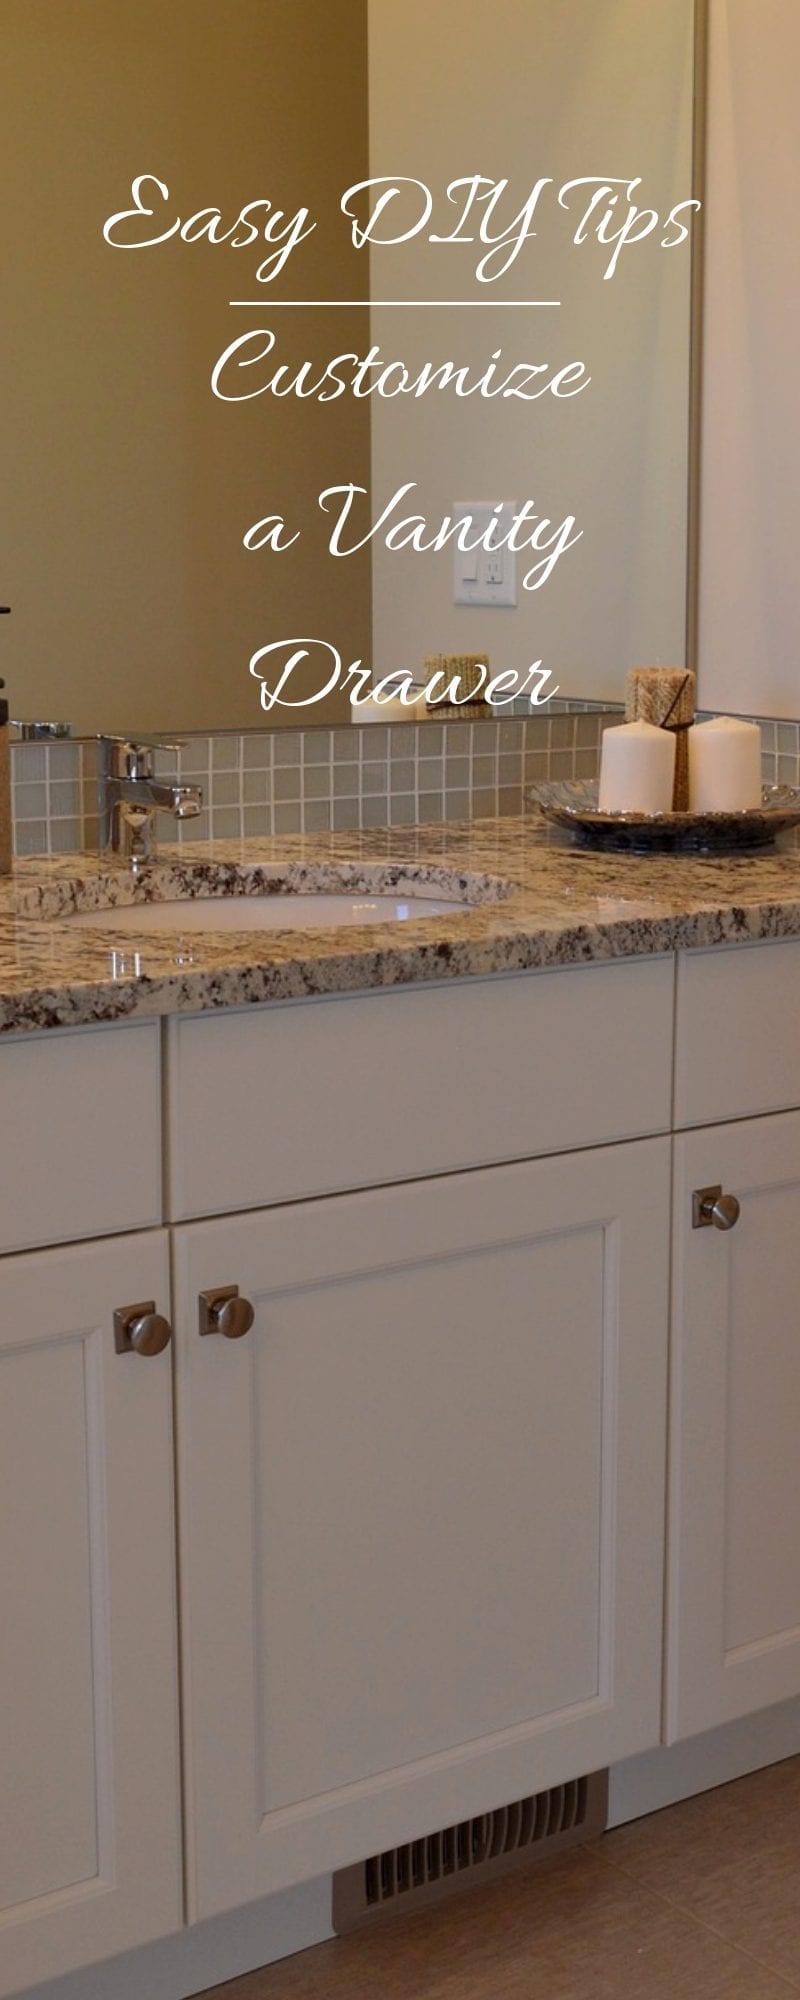 Easy DIY Tips to Customize a Vanity Drawer